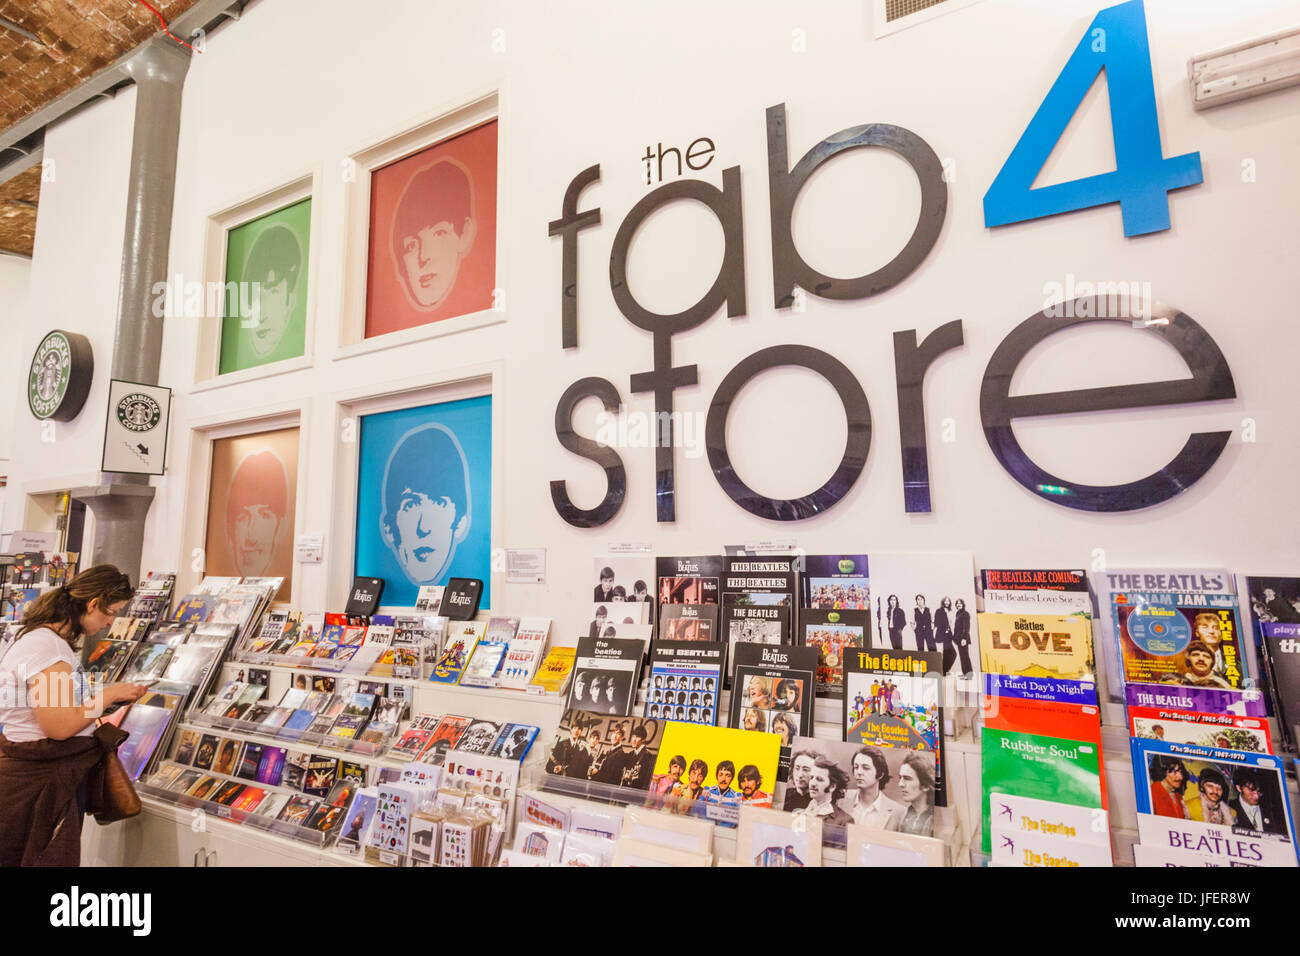 England, Merseyside, Liverpool, Albert Dock, The Beatles Story, The Fab Four Store, Tourist Shopping Stock Photo